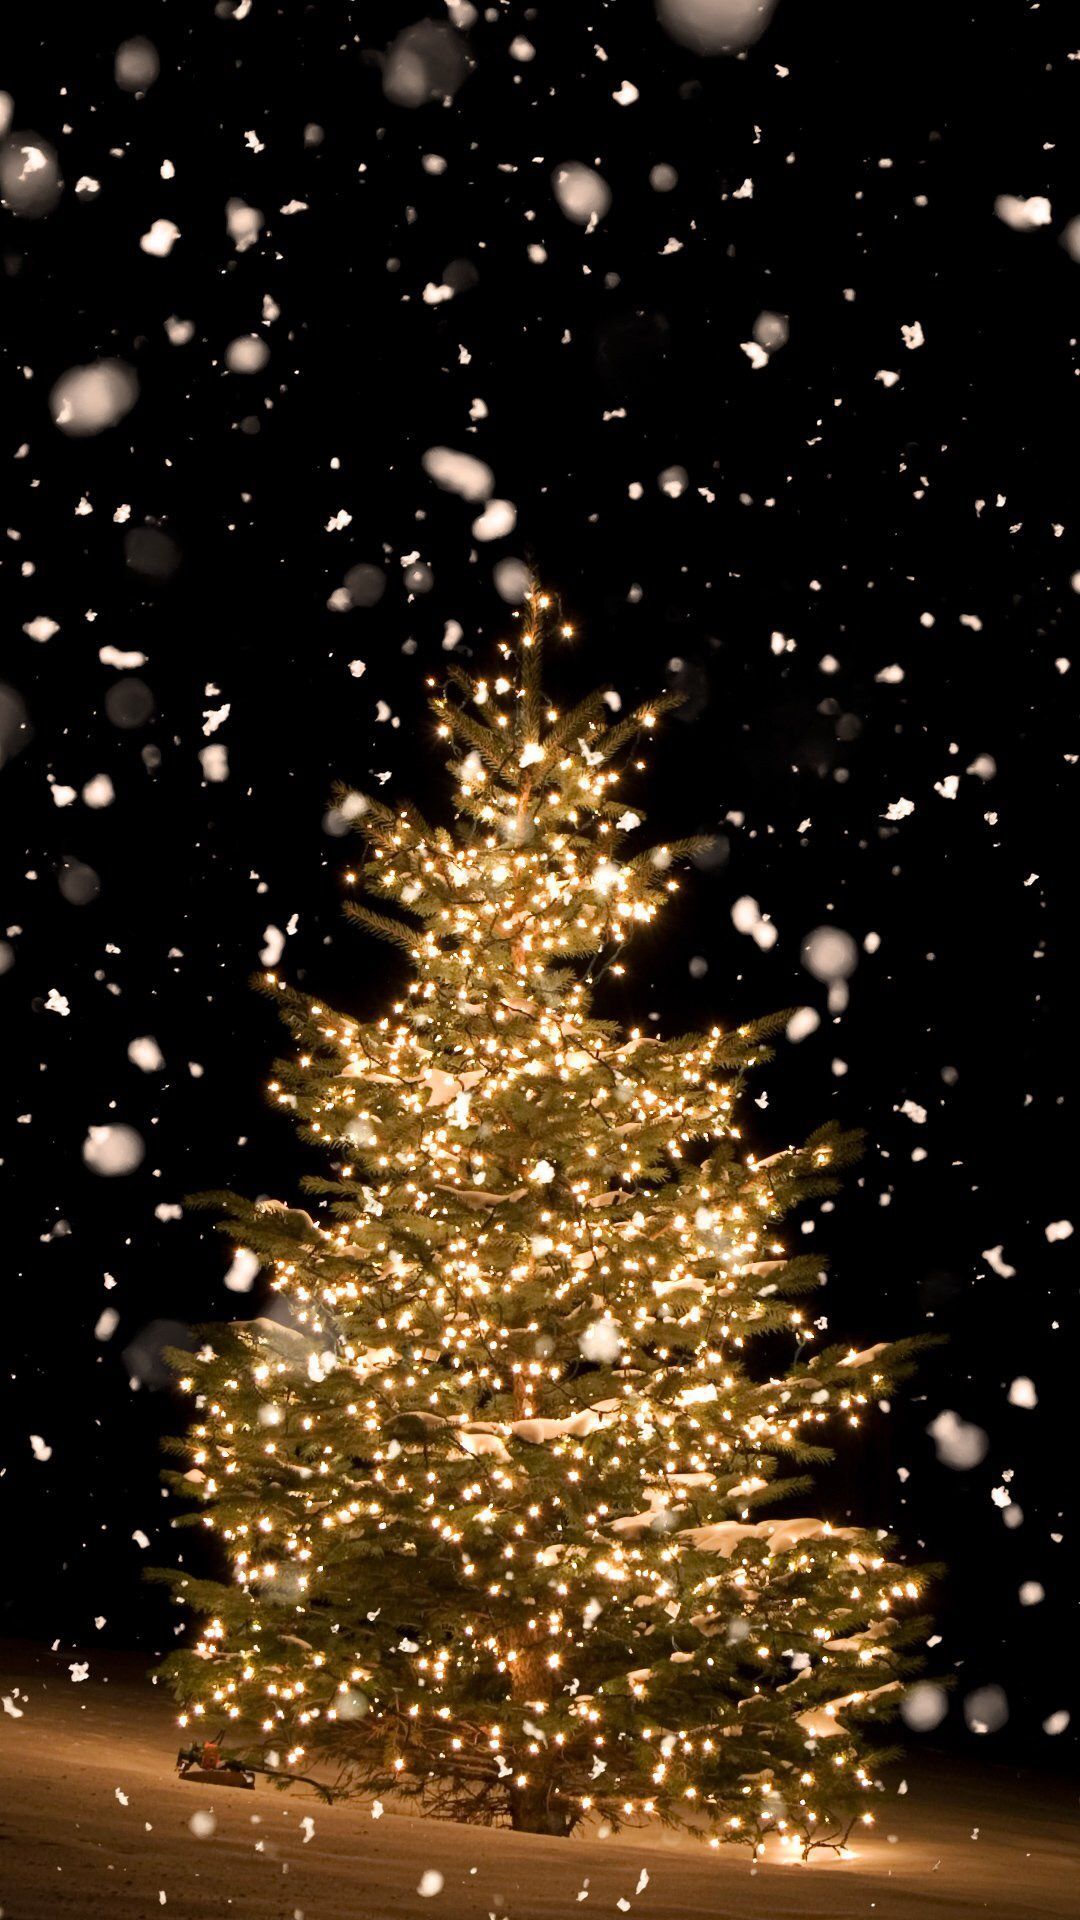 Atmospheric Perspective. Christmas phone wallpaper, Wallpaper iphone christmas, Christmas tree wallpaper